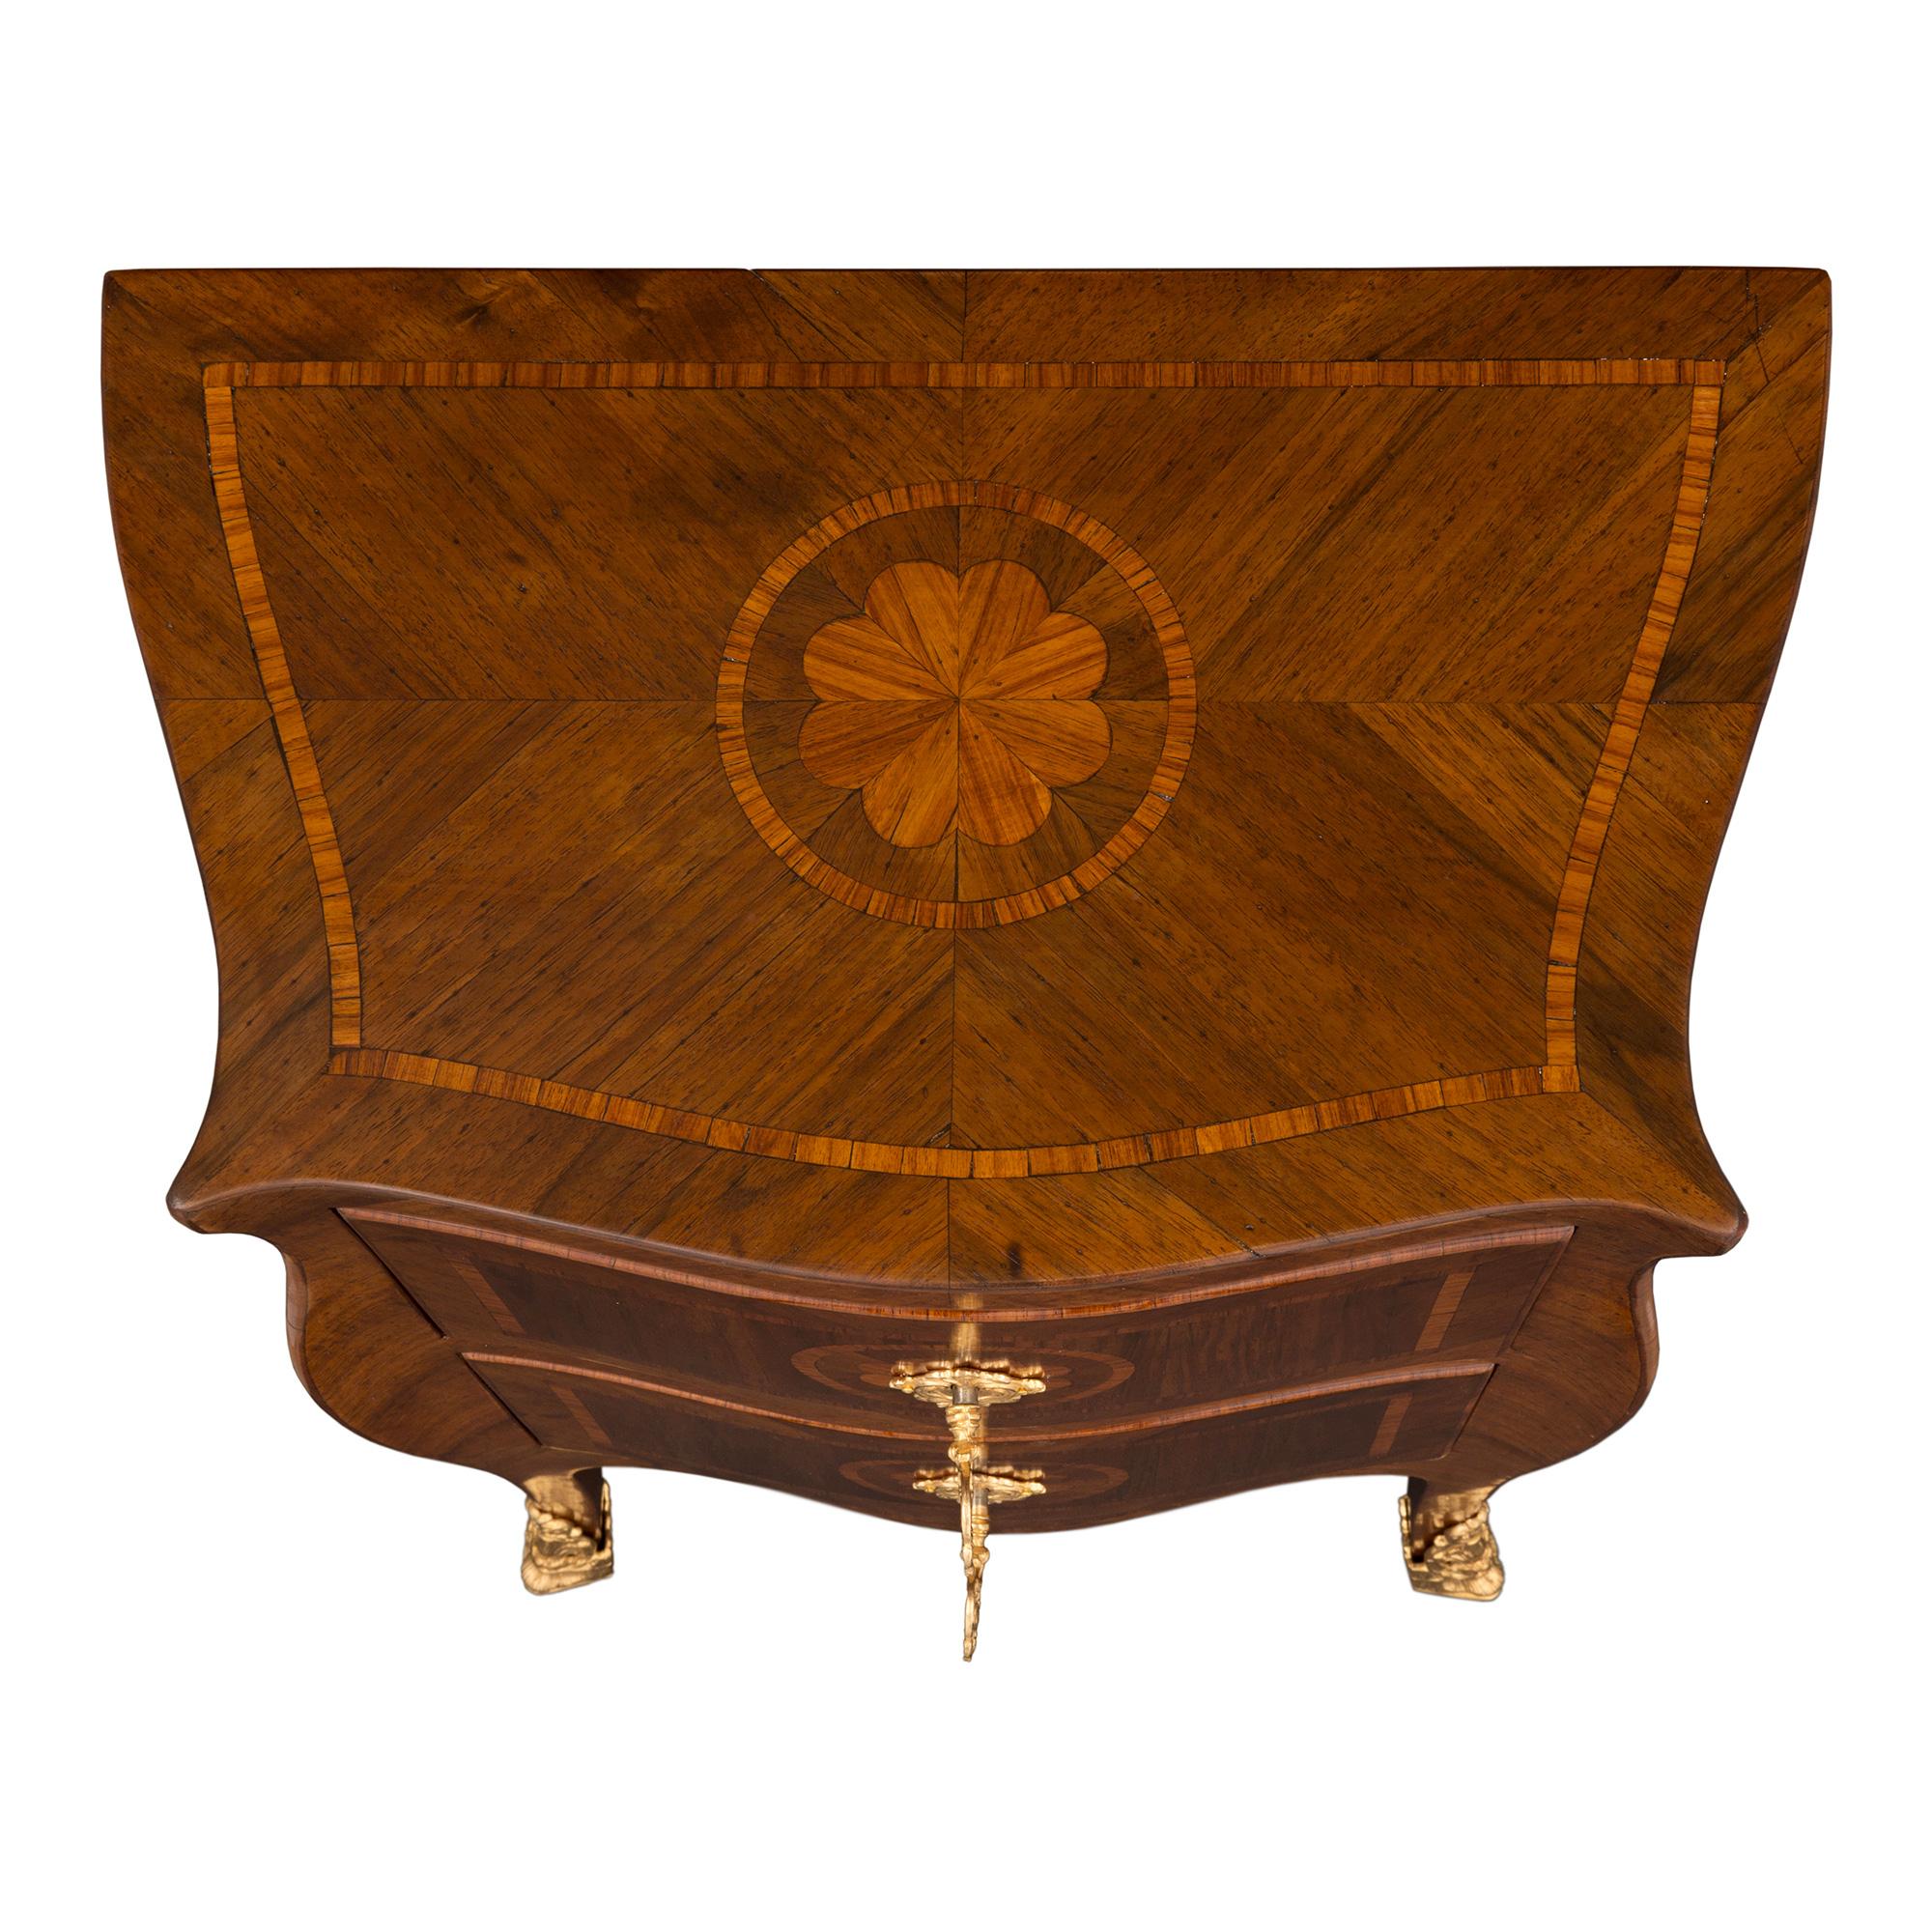 An exceptional pair of Italian 19th century Louis XV St. walnut, tulipwood and ormolu Genovese commodes. Each chest is raised by handsome lightly curved legs with elegant pierced fitted ormolu sabots. Above the scalloped shaped frieze are two